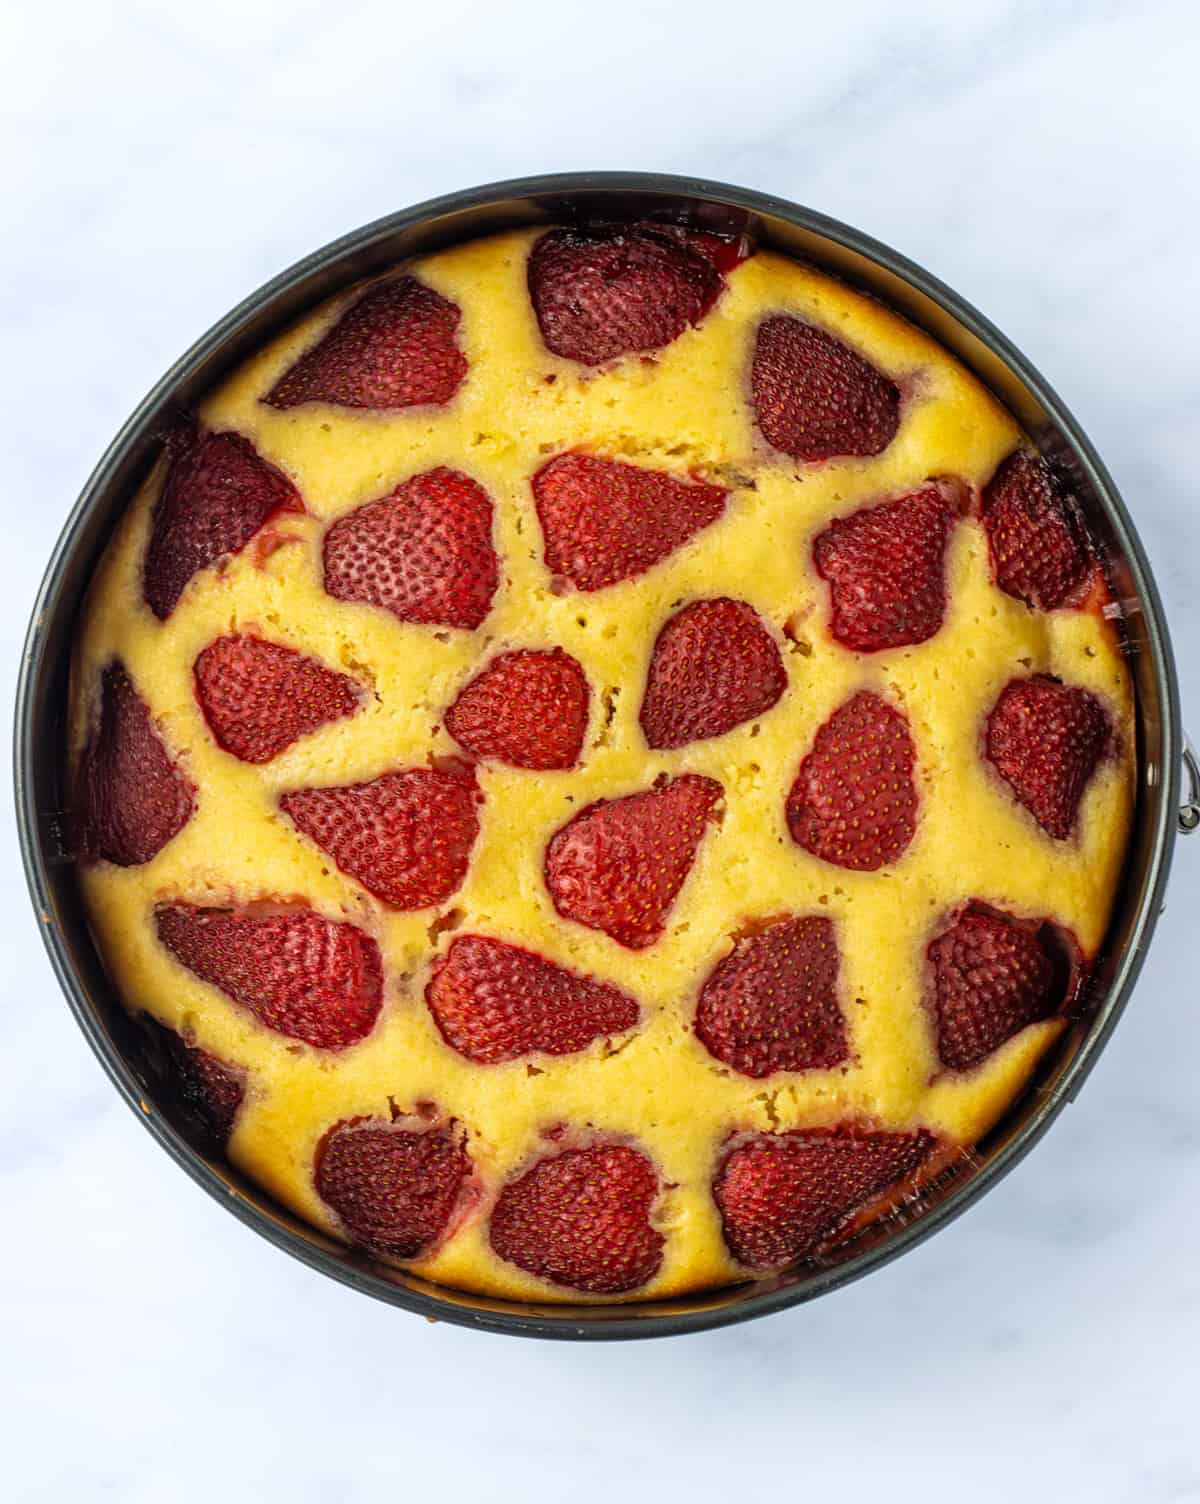 Baked strawberry studded vanilla cake in a springform pan.